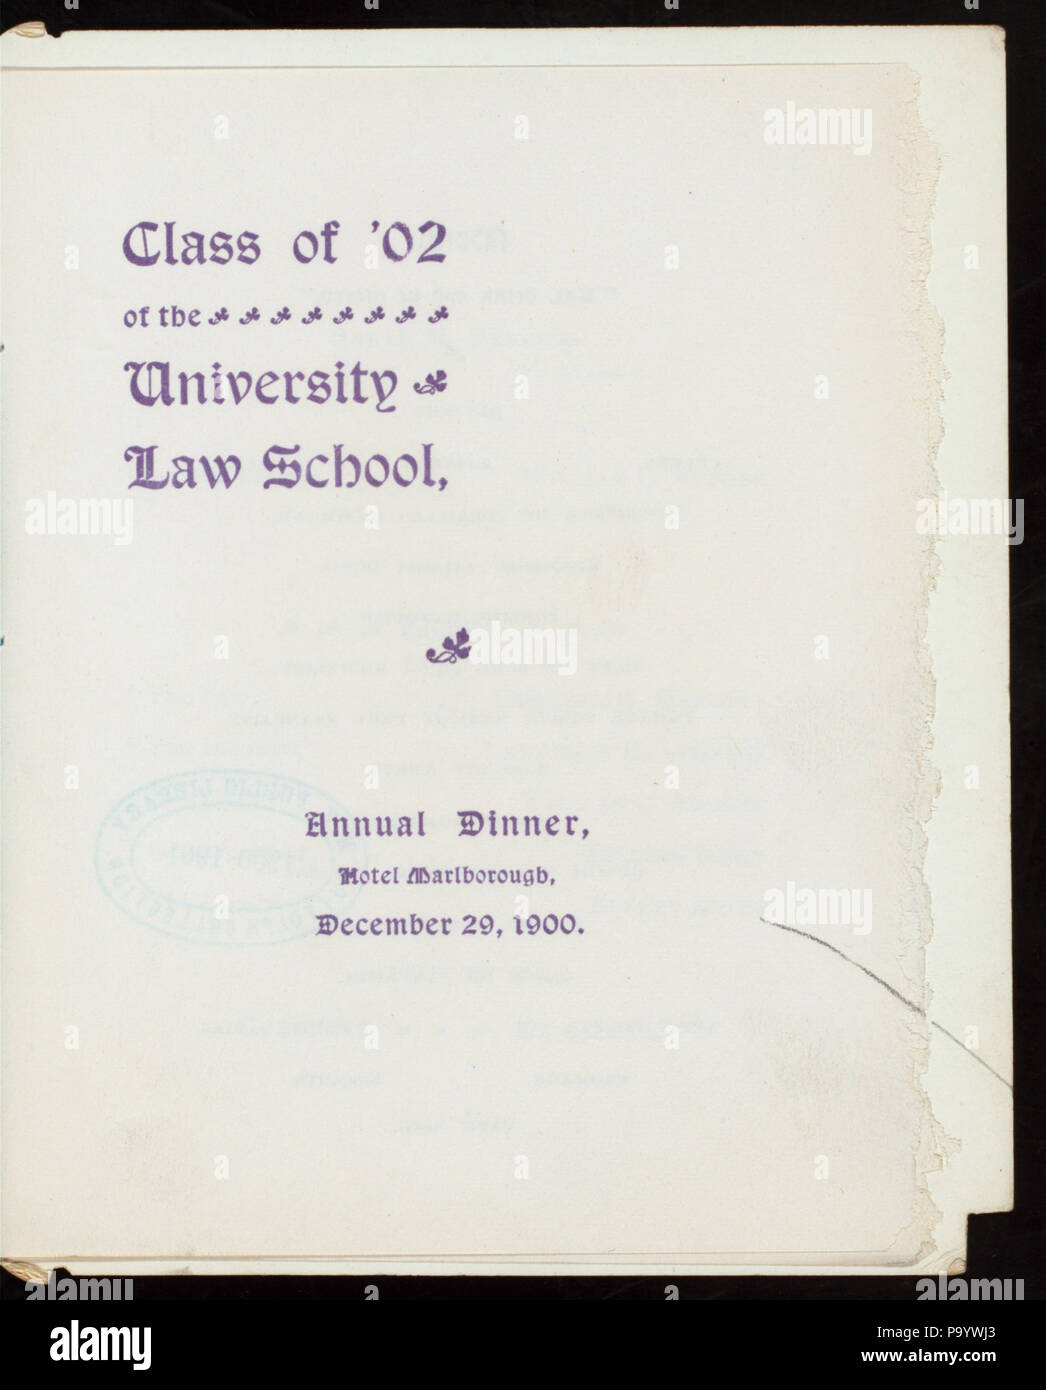 138 ANNUAl DINNER (held by) UNIVERSITY LAW SCHOOL - CLASS OF 'O2 (at) HOTEL MARLBOROUGH (HOTEL) (NYPL Hades-275290-4000011953) Stock Photo